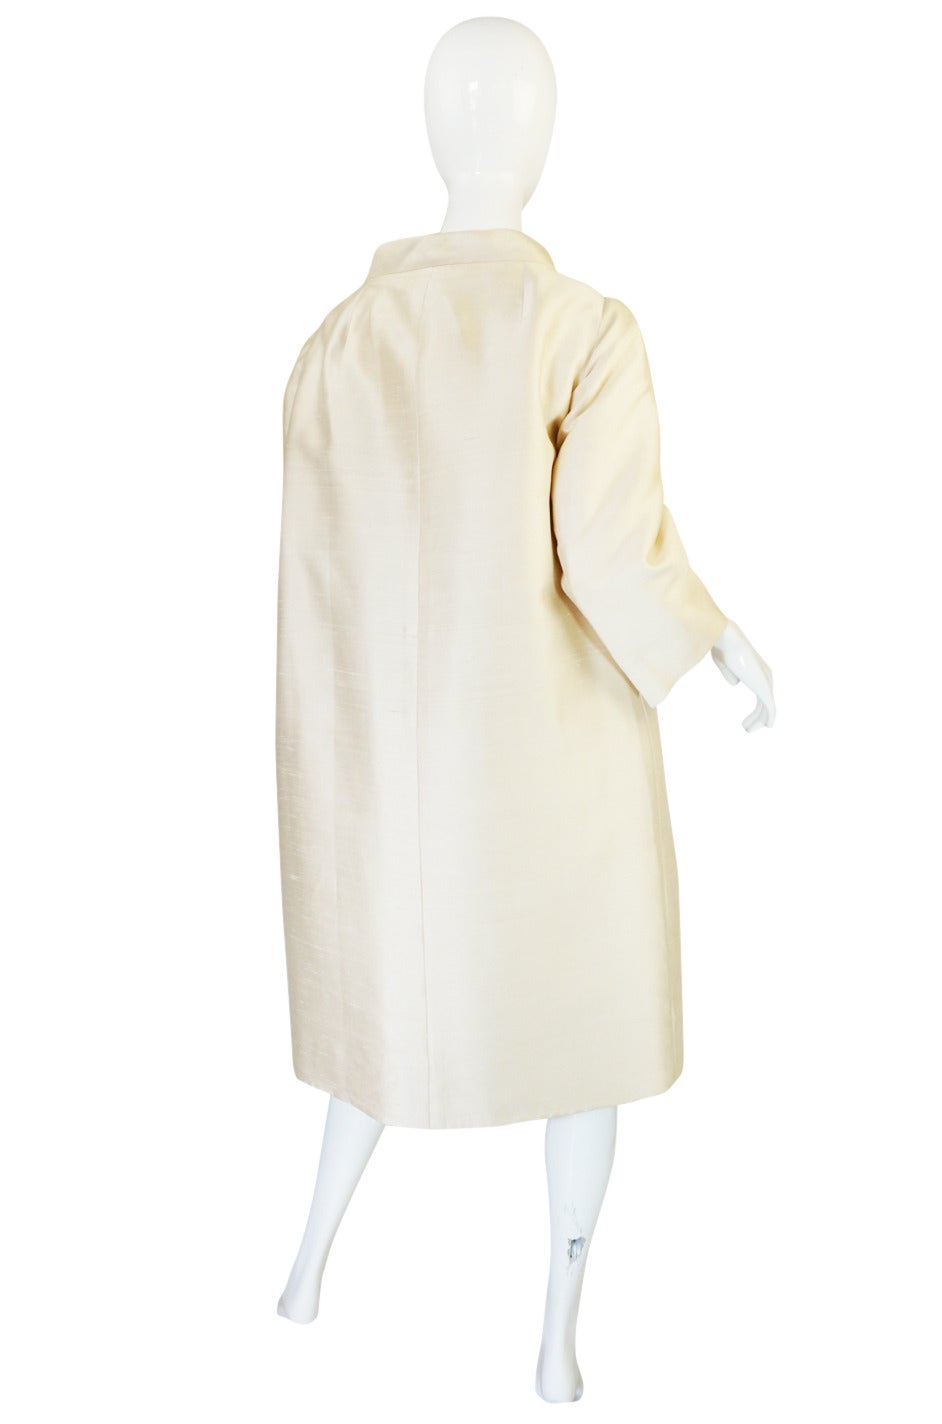 Women's c1960 Christian Dior London Couture Numbered Coat & Dress